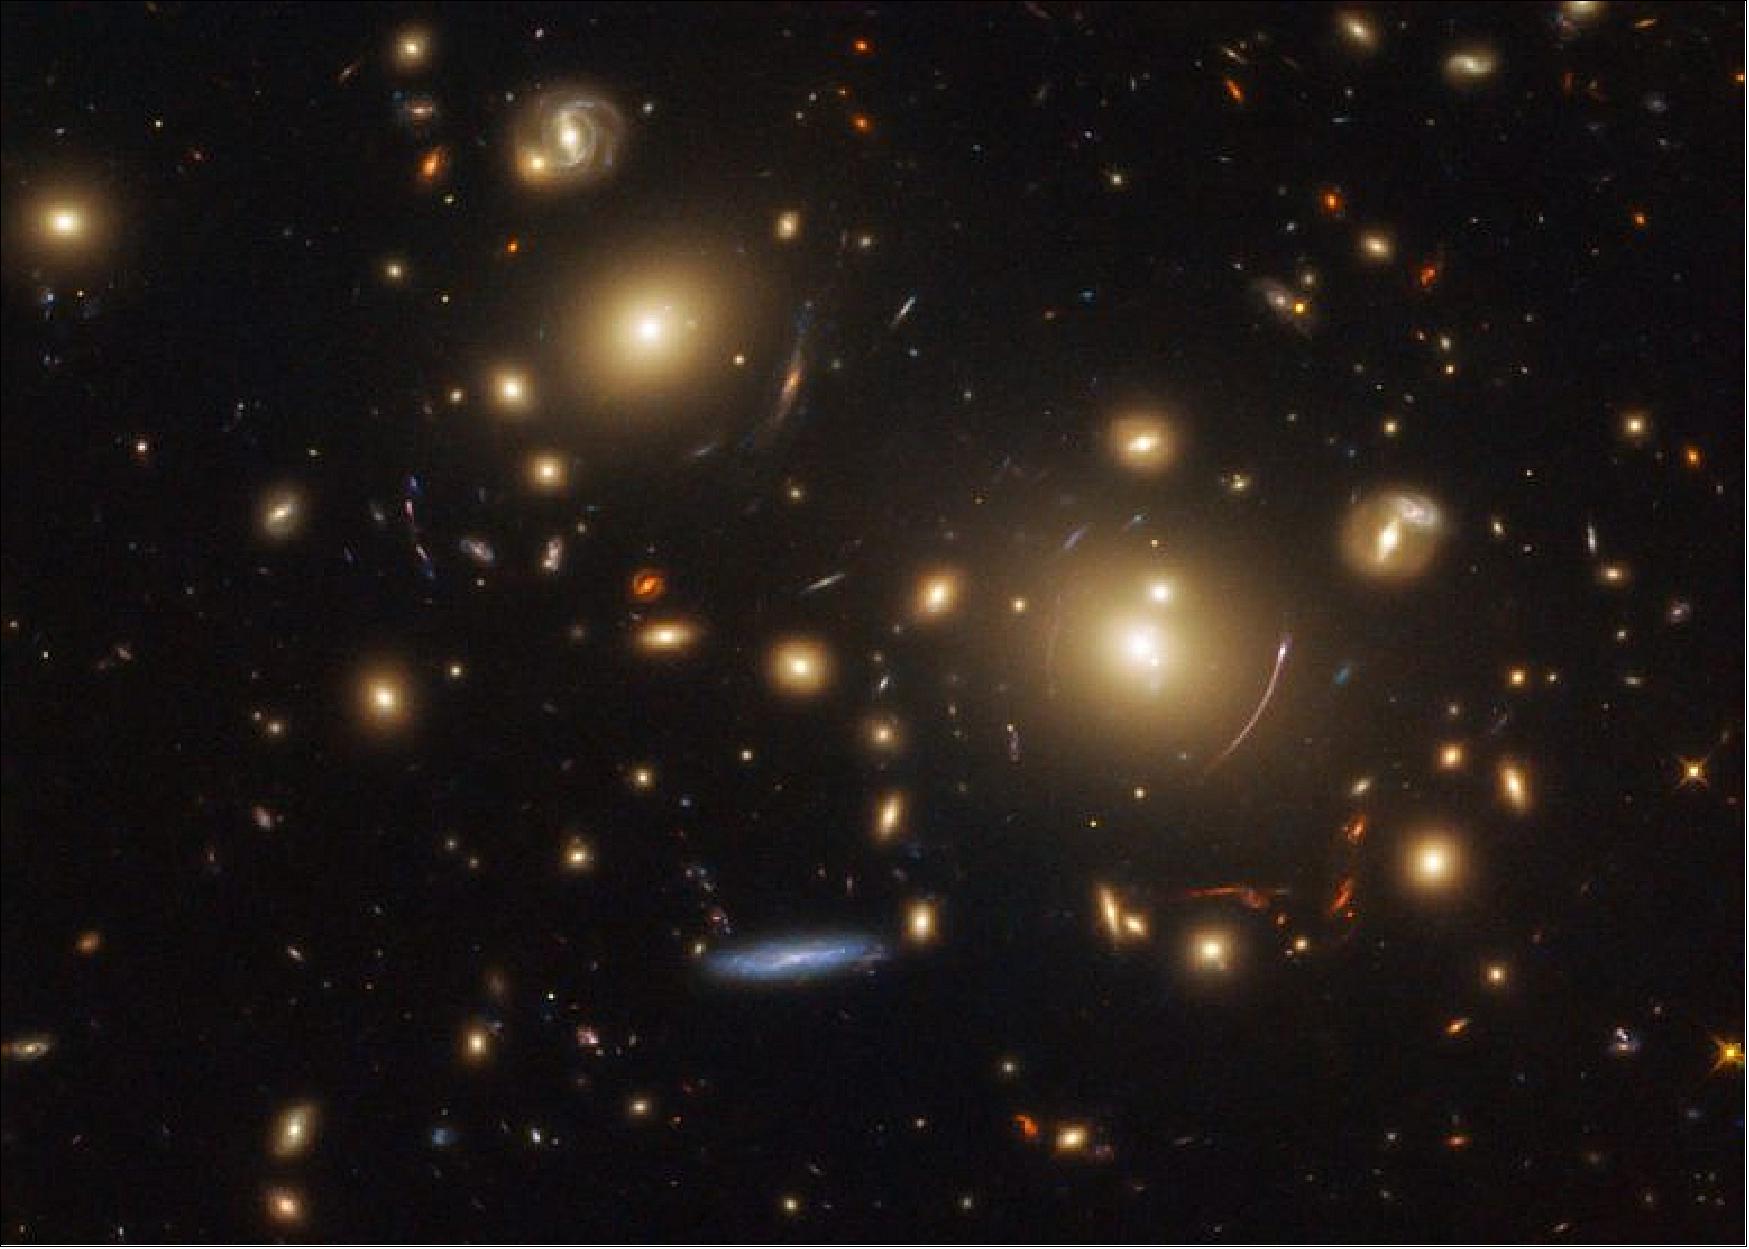 Figure 78: This picture showcases a gravitational lensing system called SDSS J0928+2031. Quite a few images of this type of lensing have been featured as Pictures of the Week in past months, as NASA/ESA Hubble Space Telescope data is currently being used to research how stars form and evolve in distant galaxies (image credit: ESA/Hubble & NASA, M. Gladders et al.)